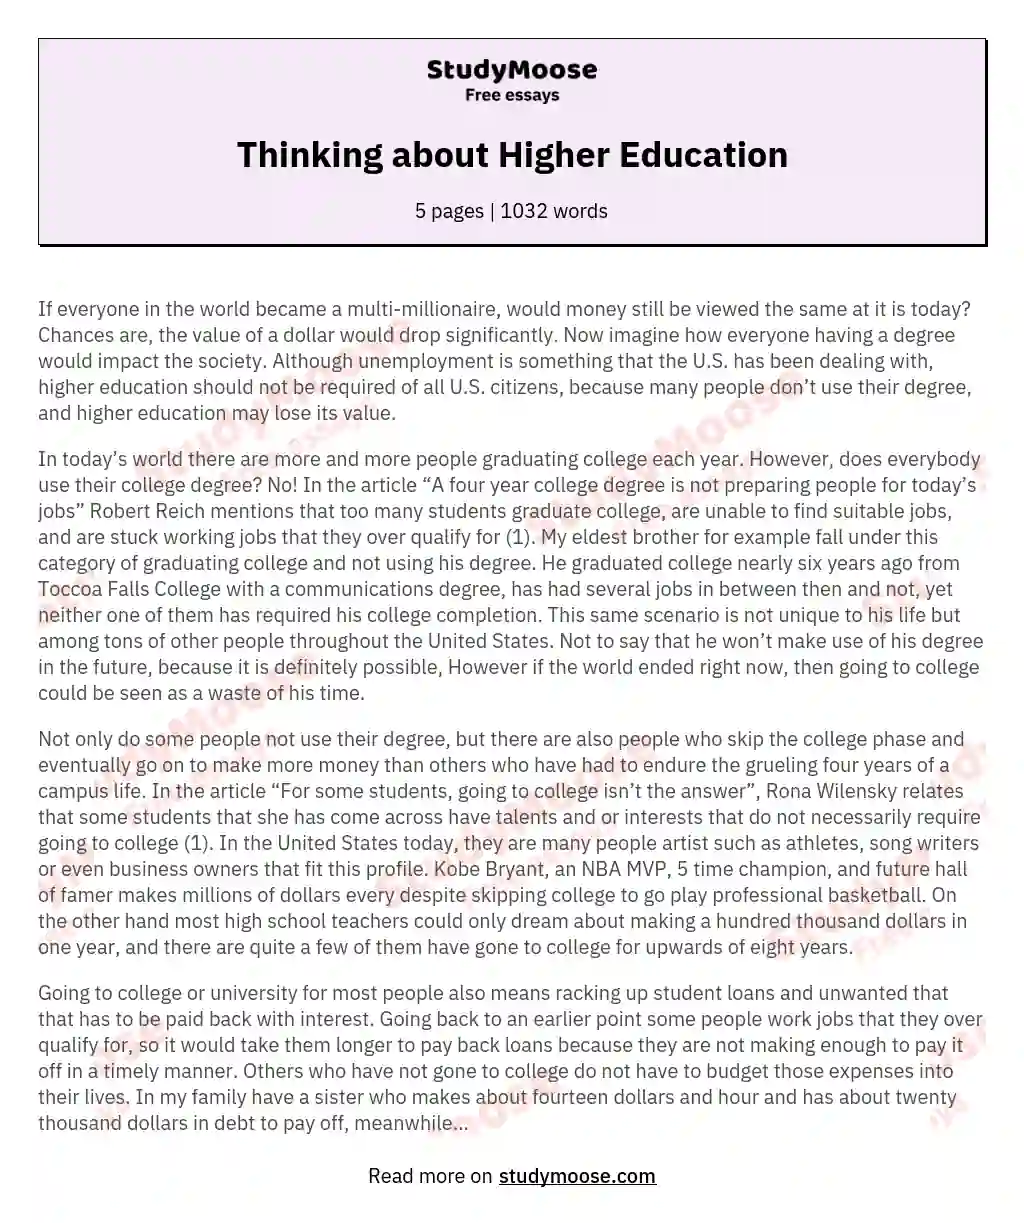 Thinking about Higher Education essay